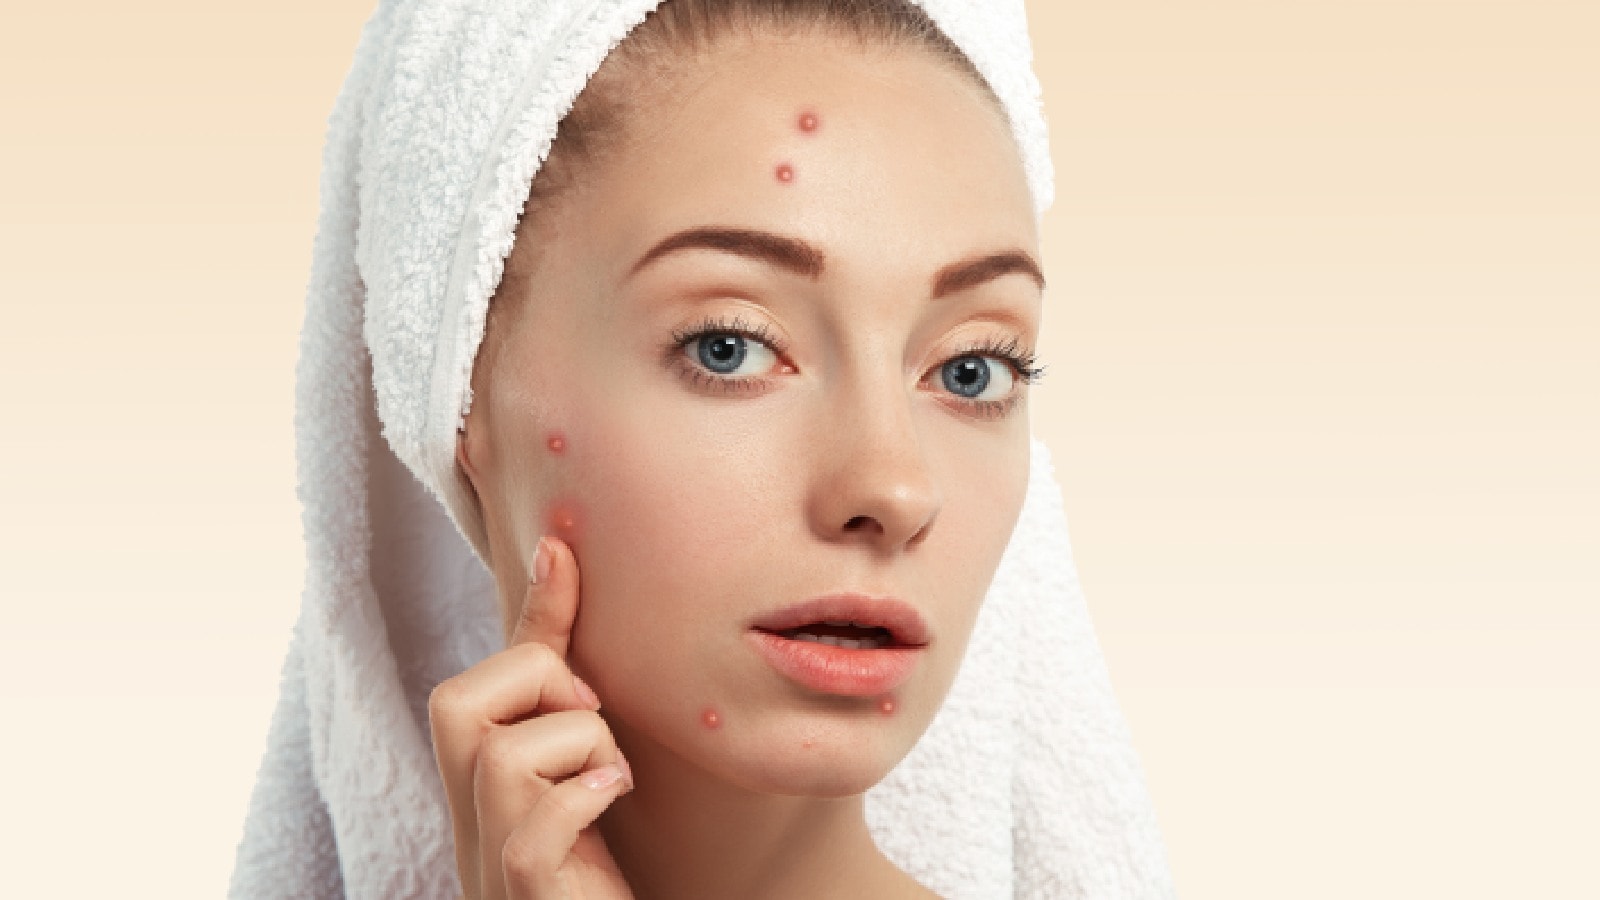 Tips to get rid of acne at home